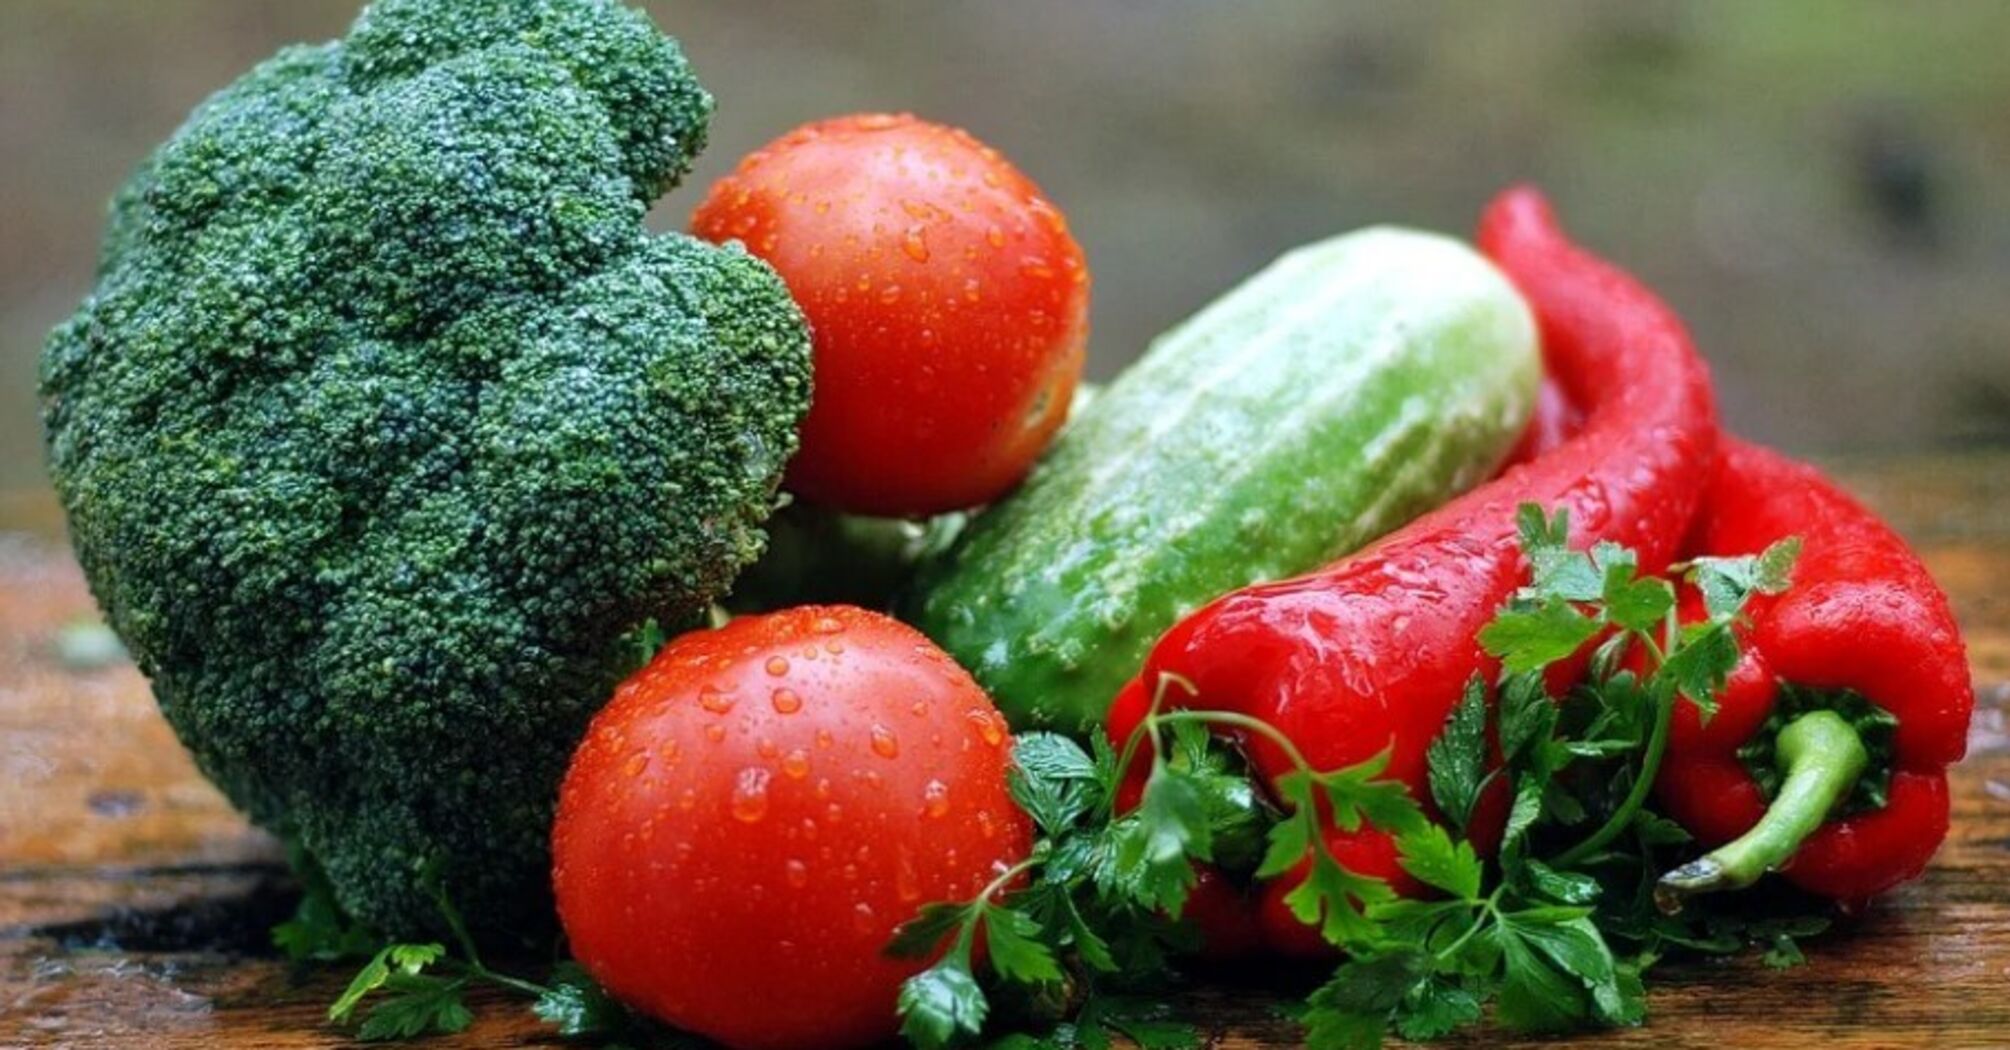 Boil or bake: how to cook vegetables to make them healthier